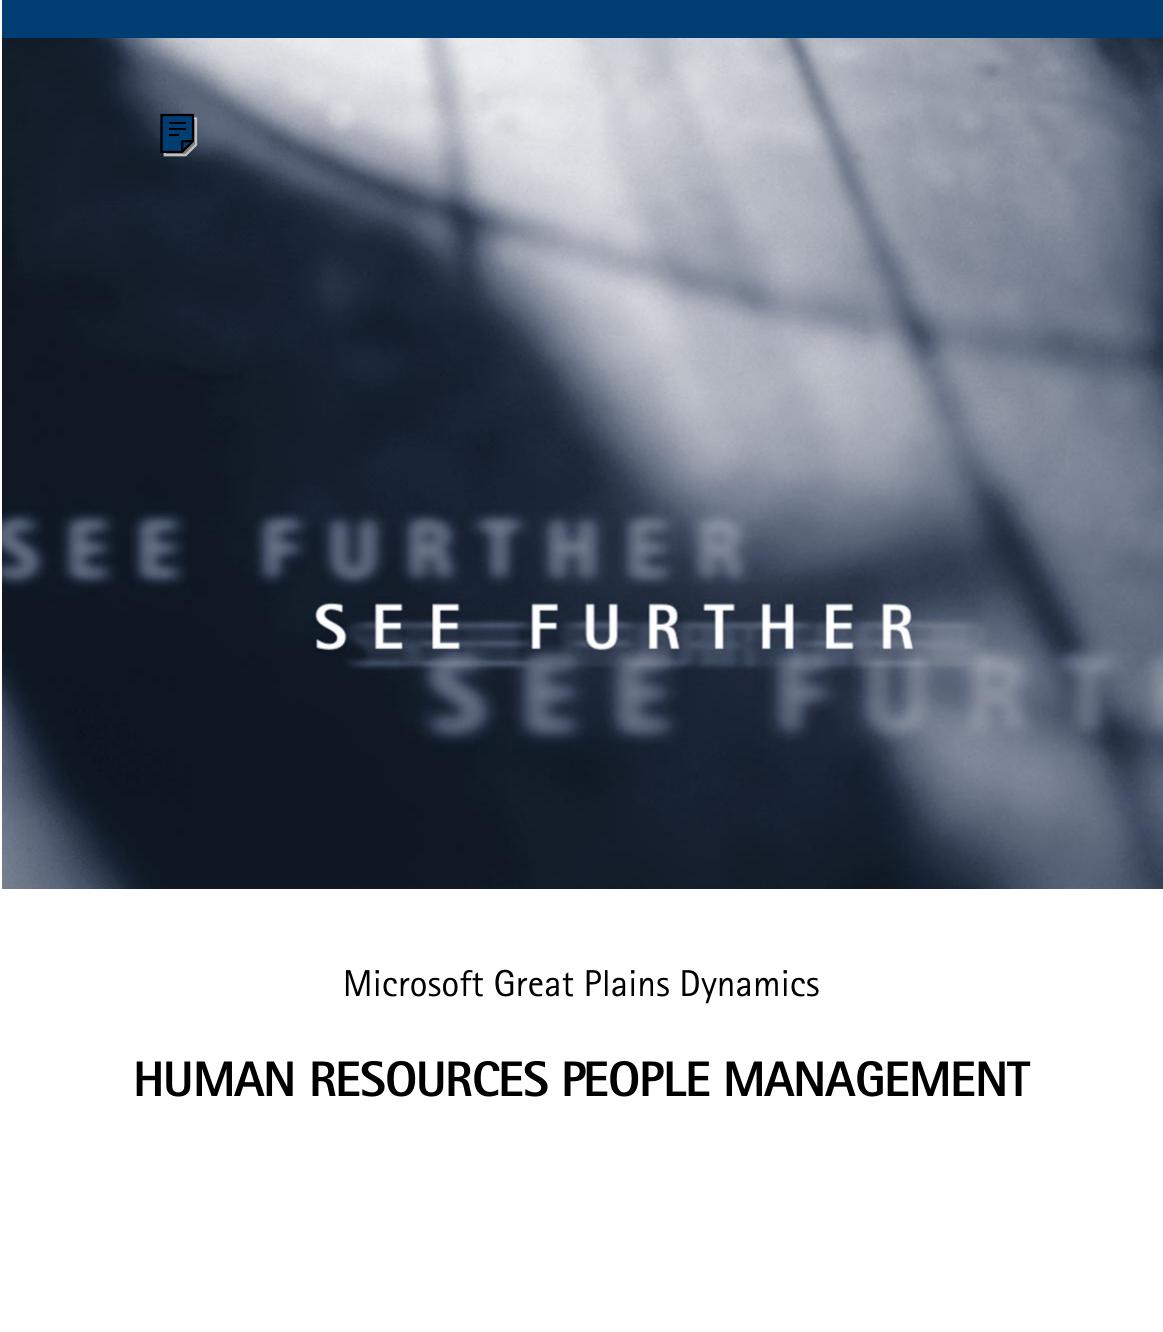 Human Resources People Management